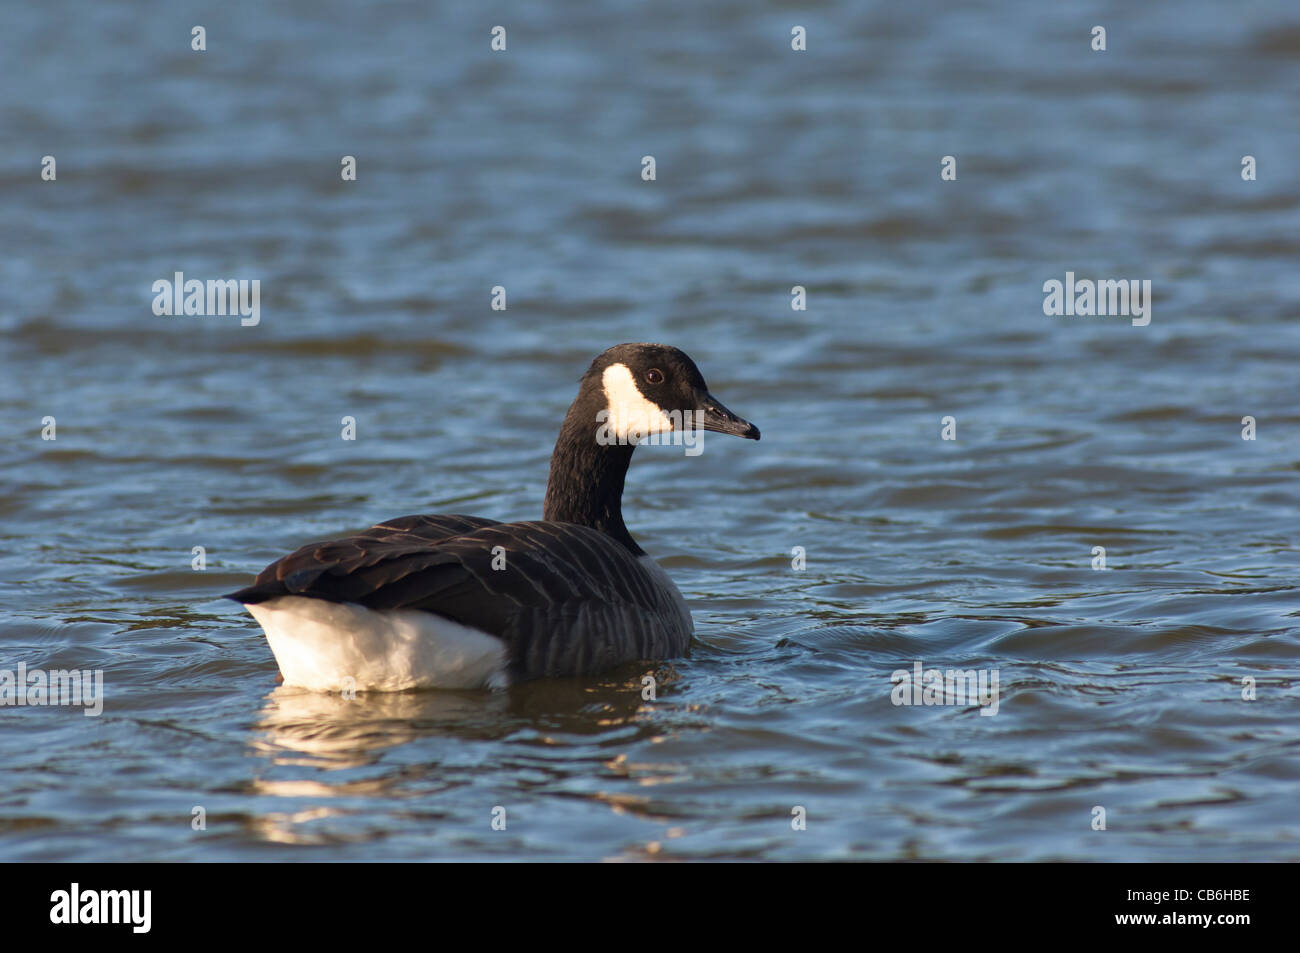 A Canada Goose ( Branta canadensis ) swimming on a lake in the Uk Stock Photo